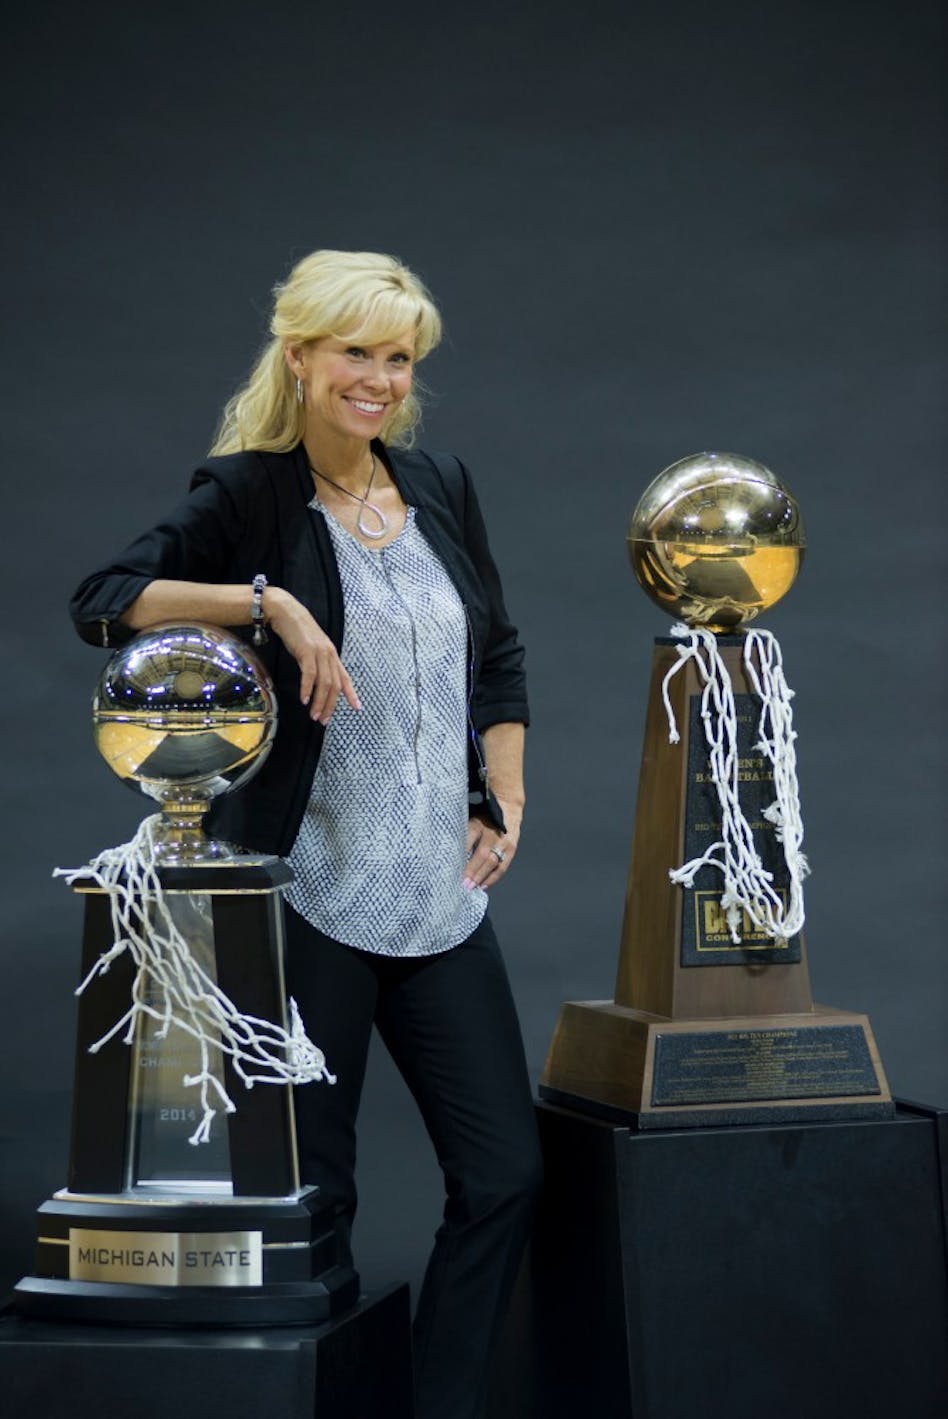 Women's basketball head coach Suzy Merchant poses for a portrait during Women's Basketball Media Day on Oct. 28, 2015 at Breslin Center.